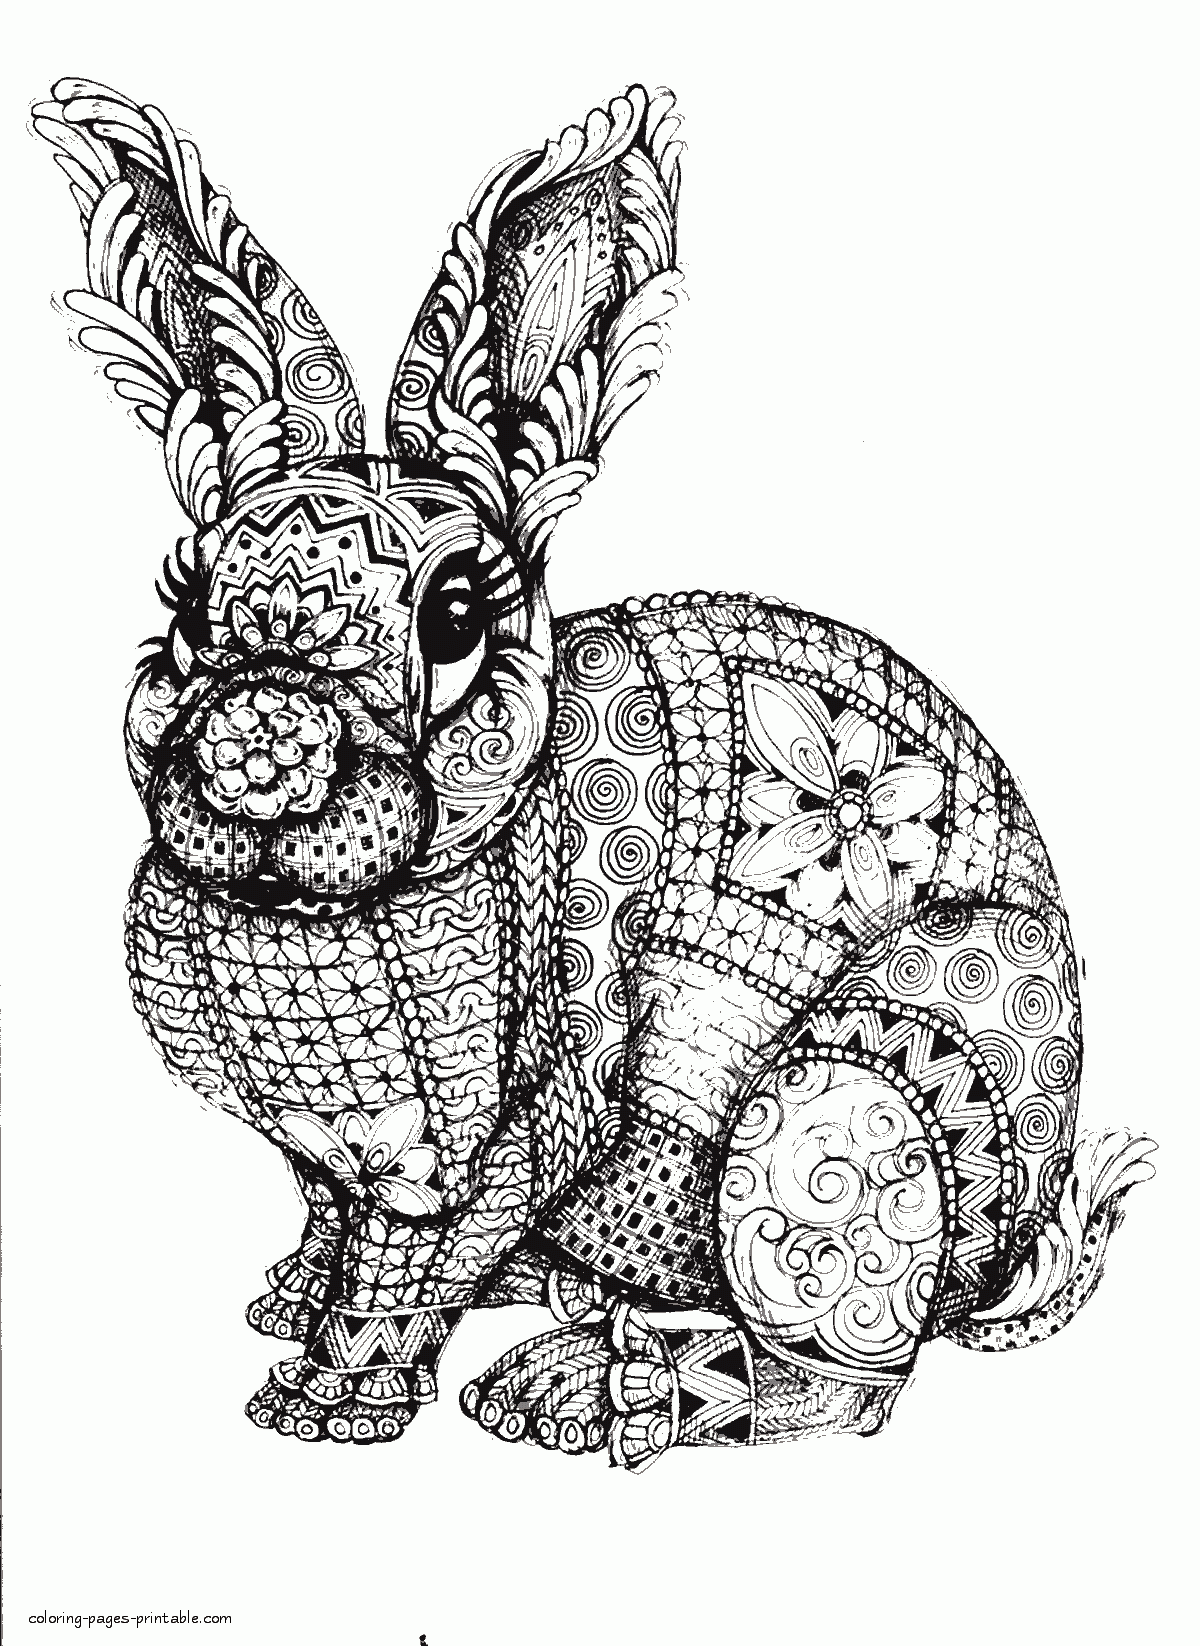 Difficult Animal Coloring Pages. A Rabbit    COLORING PAGES ...